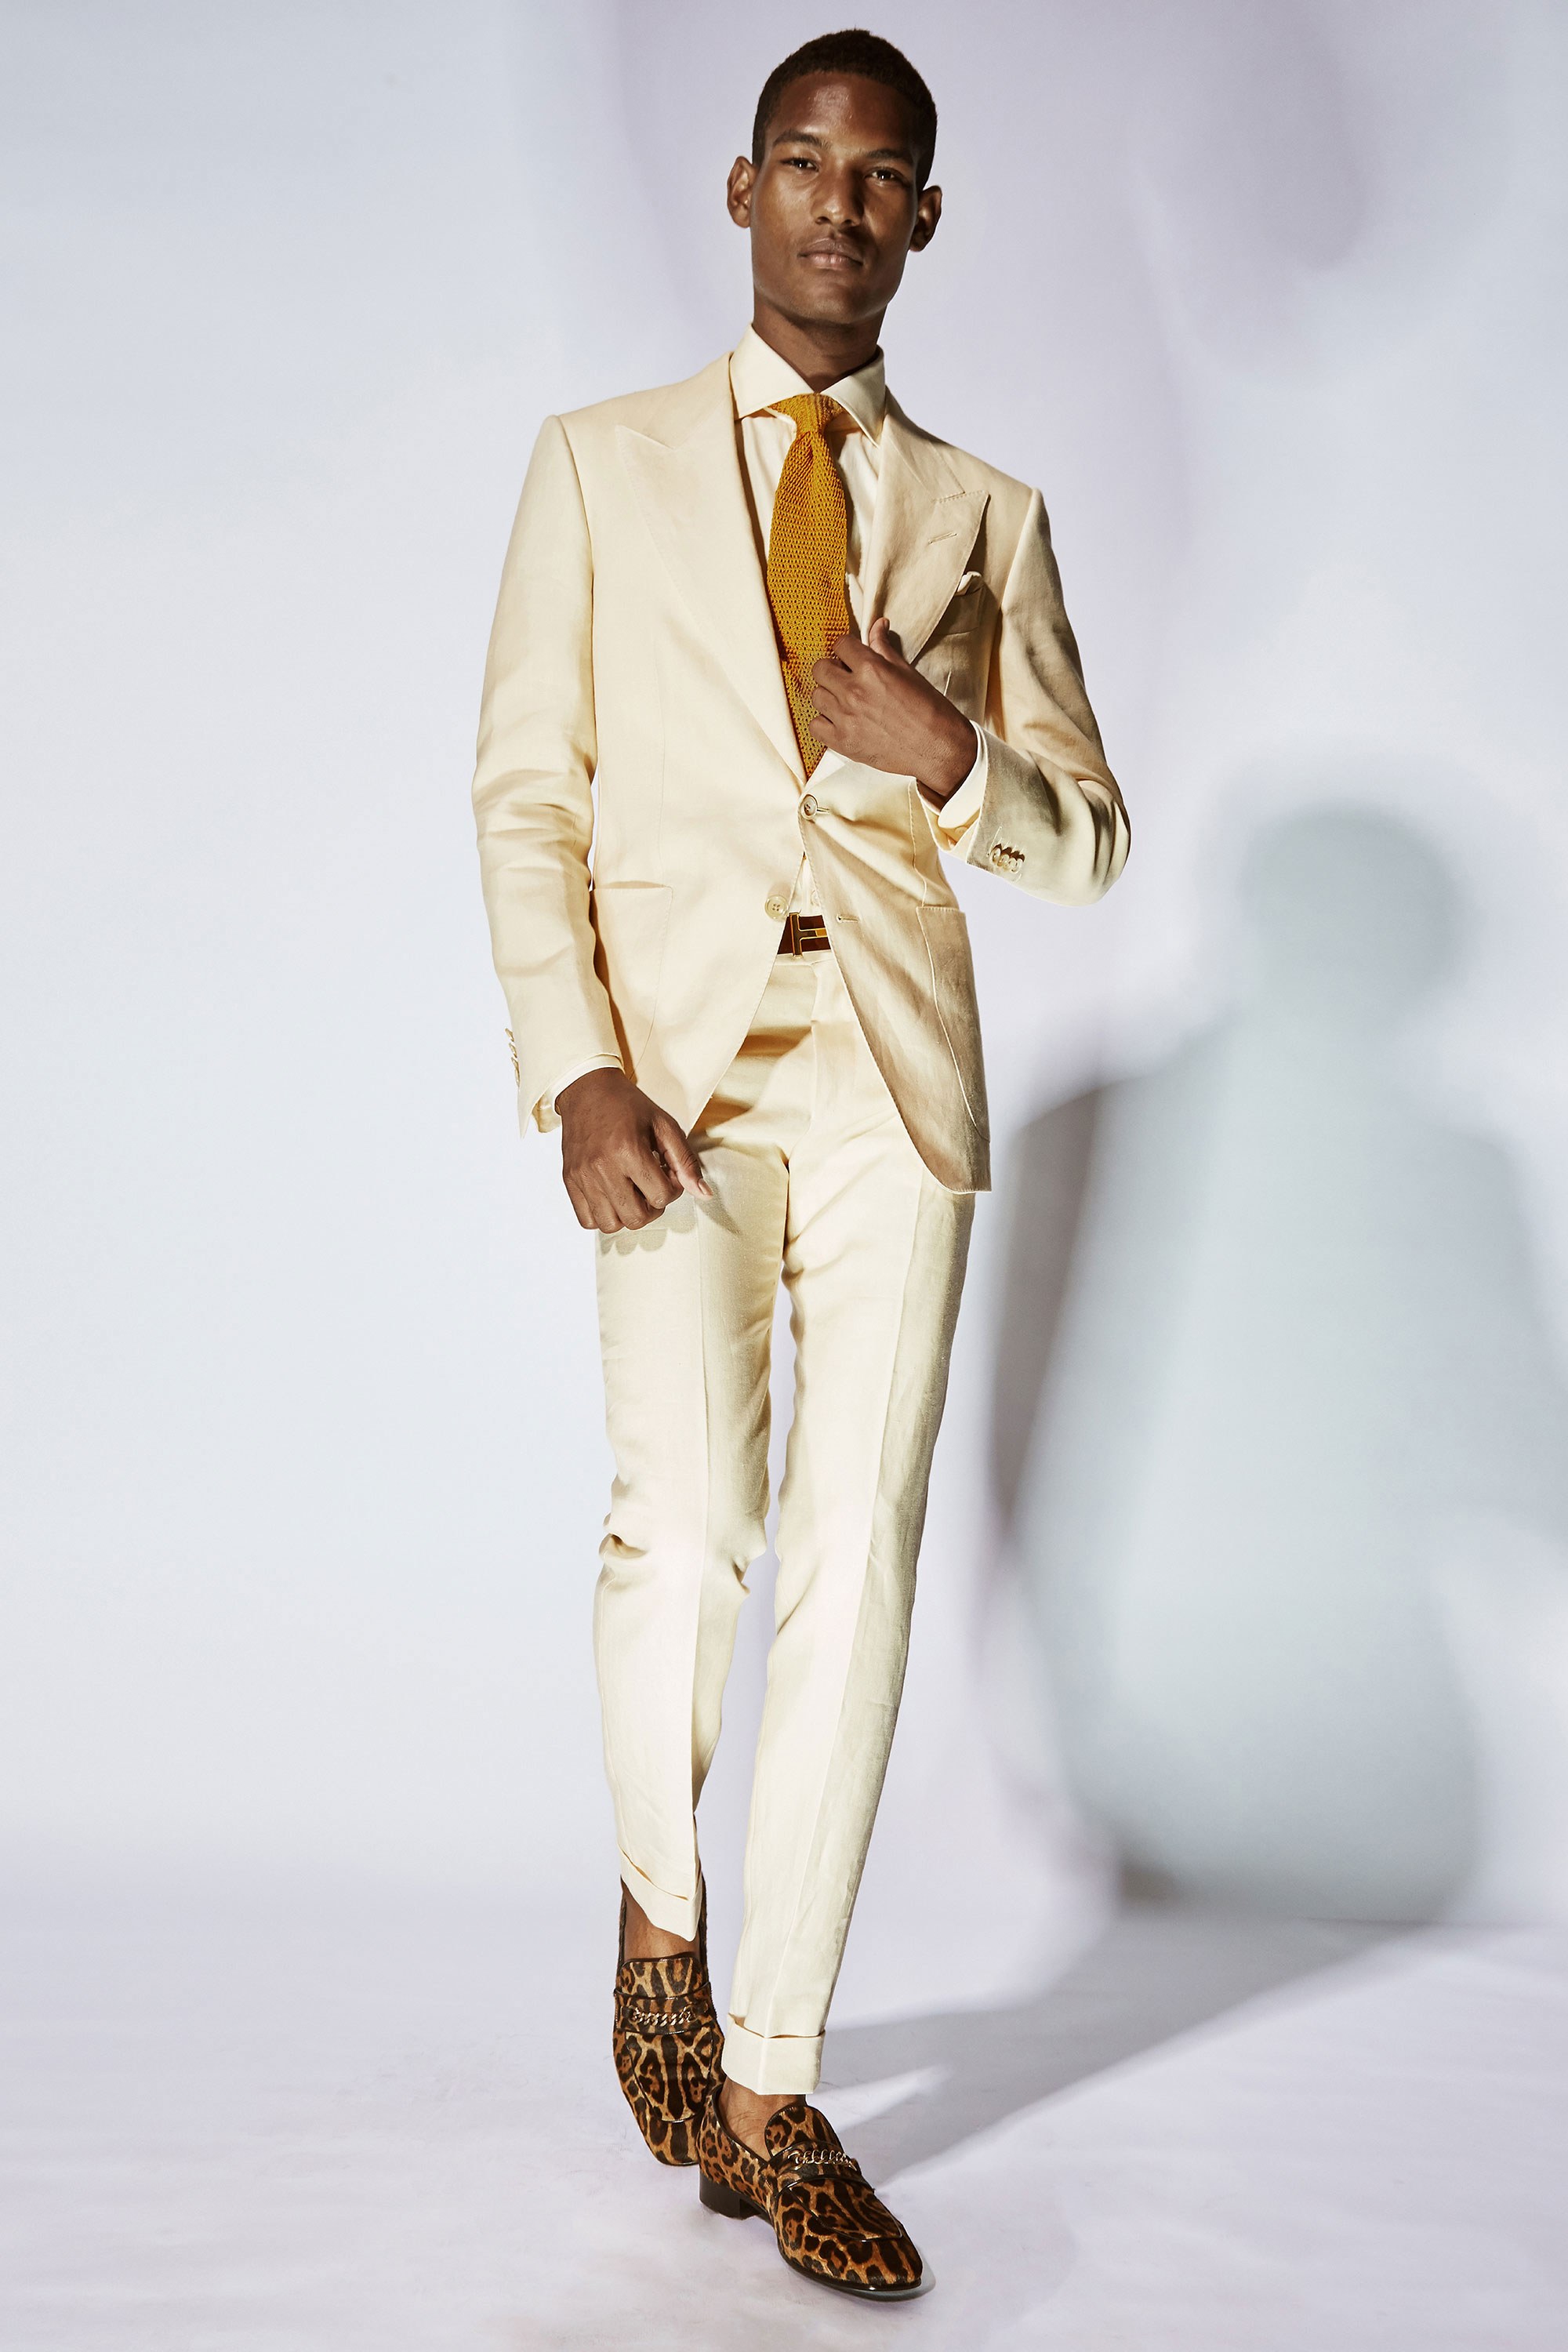 Show Review: Tom Ford Spring 2018 Menswear